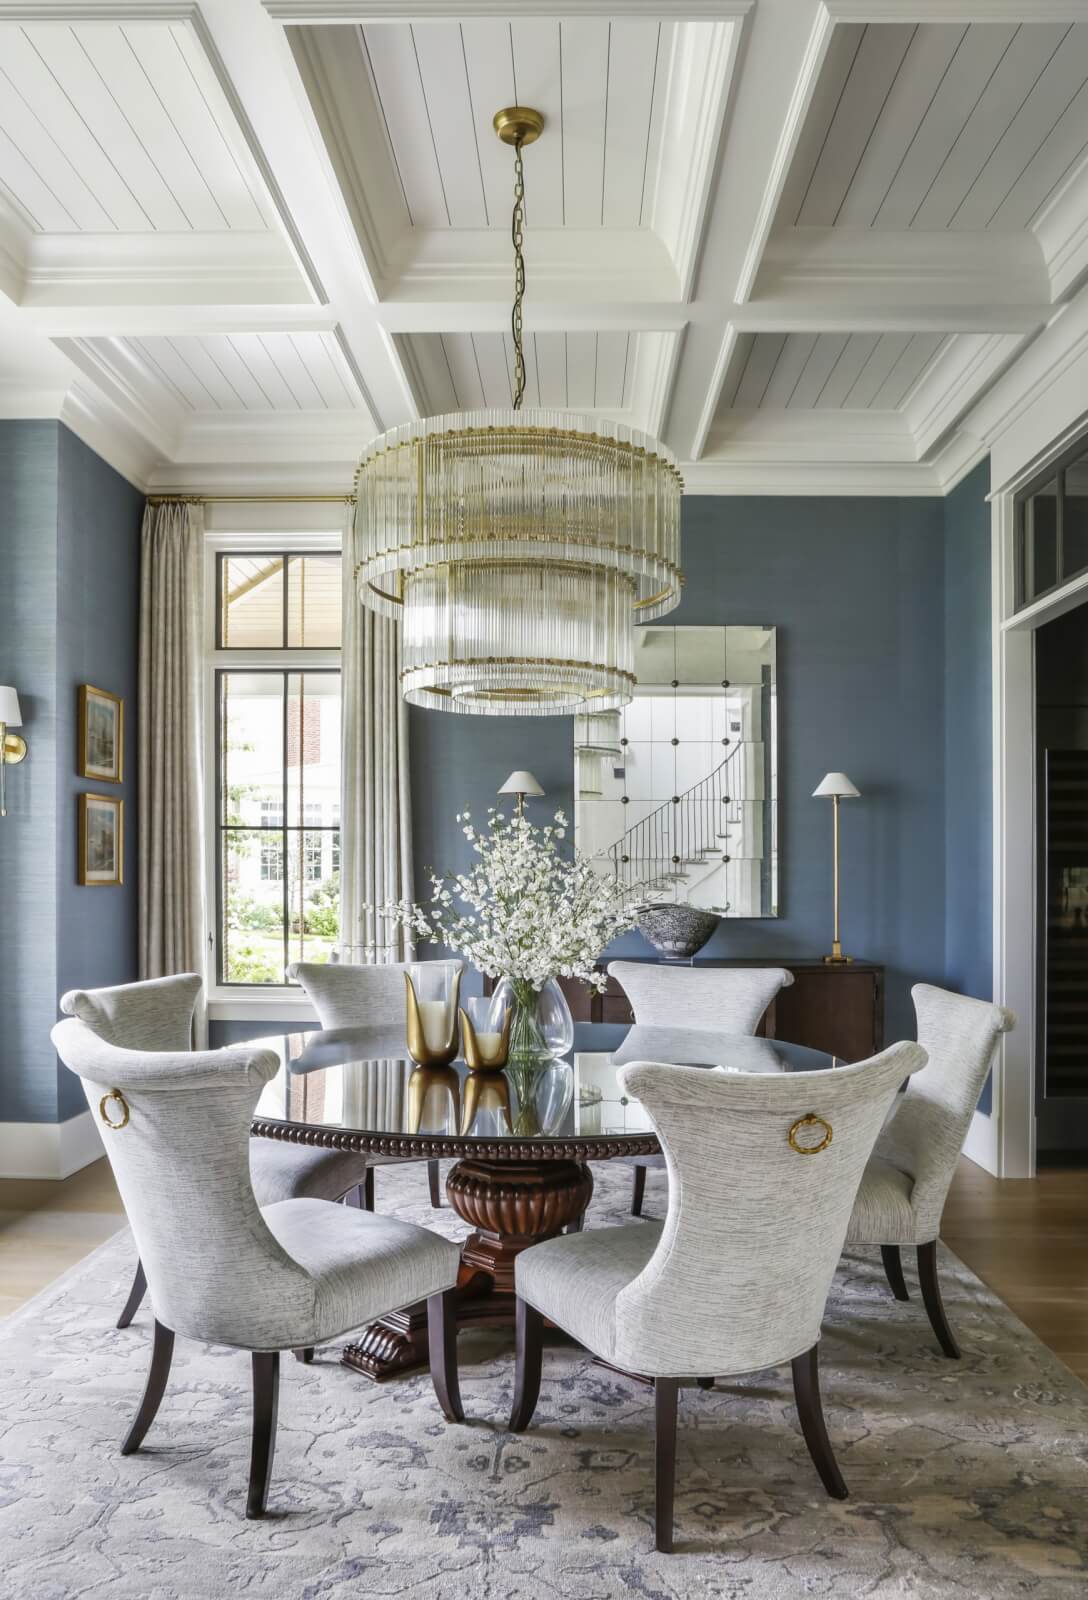 Dining room with blue walls and an elegant chandelier.